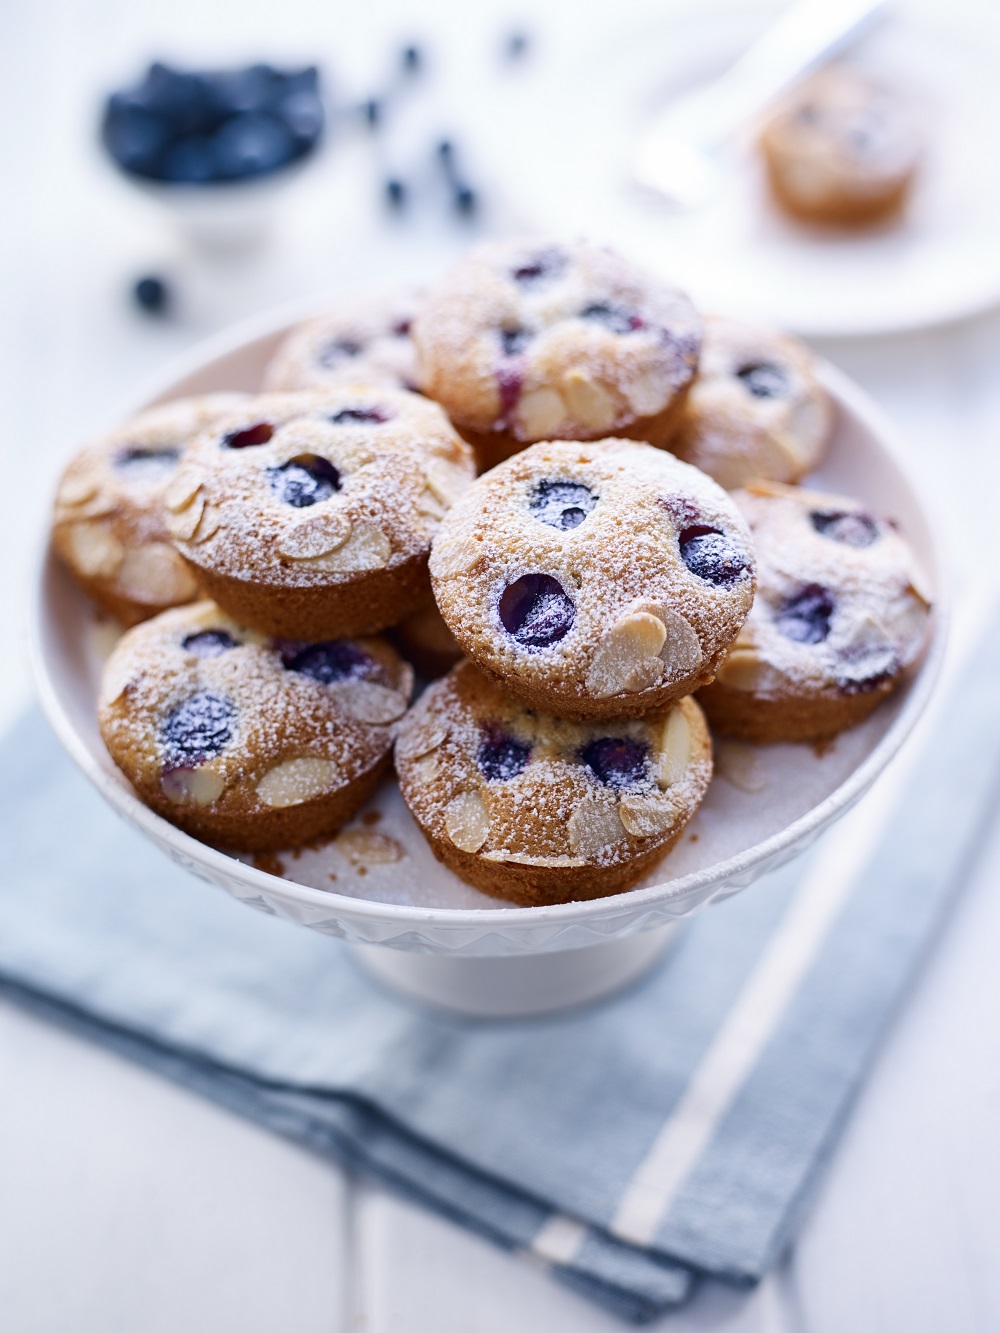 BerryWorld Blueberry Friands Topped With Flaked Almonds